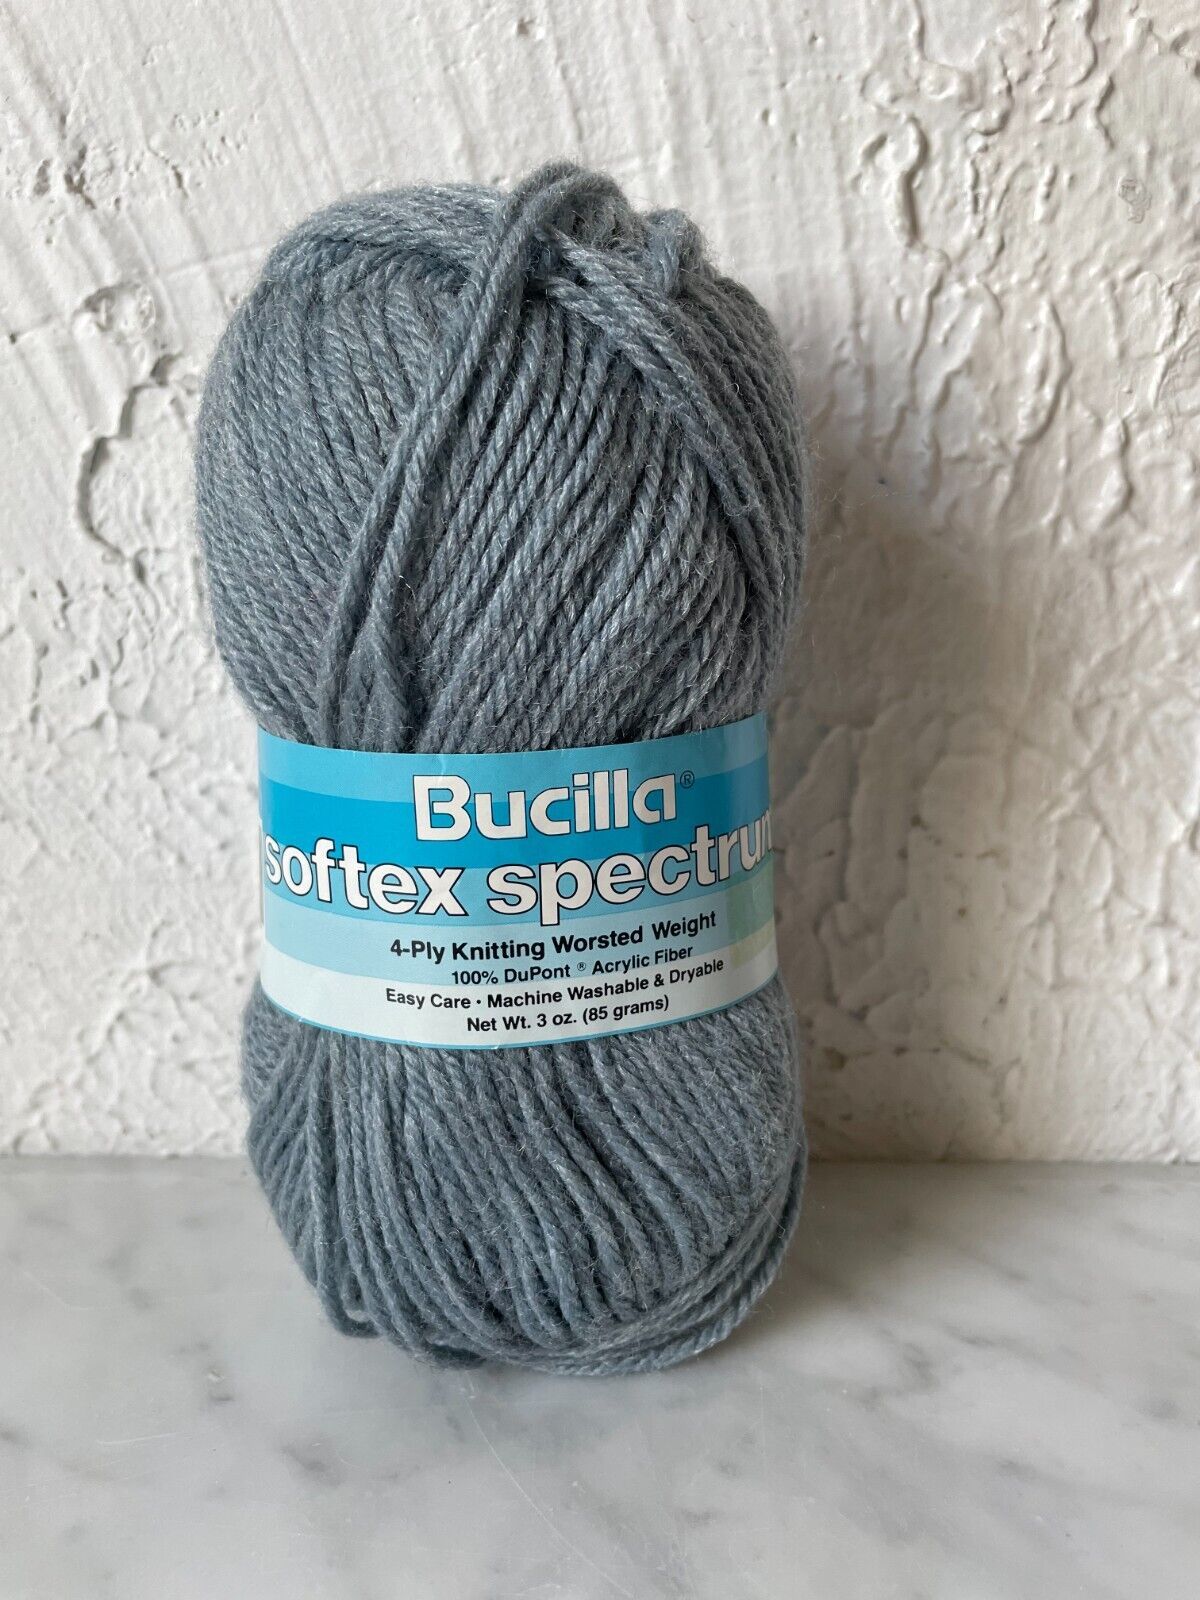 Primary image for Vintage Bucilla Softex Spectrum 4 Ply Worsted Weight Yarn - 1 Skein Blue #1402